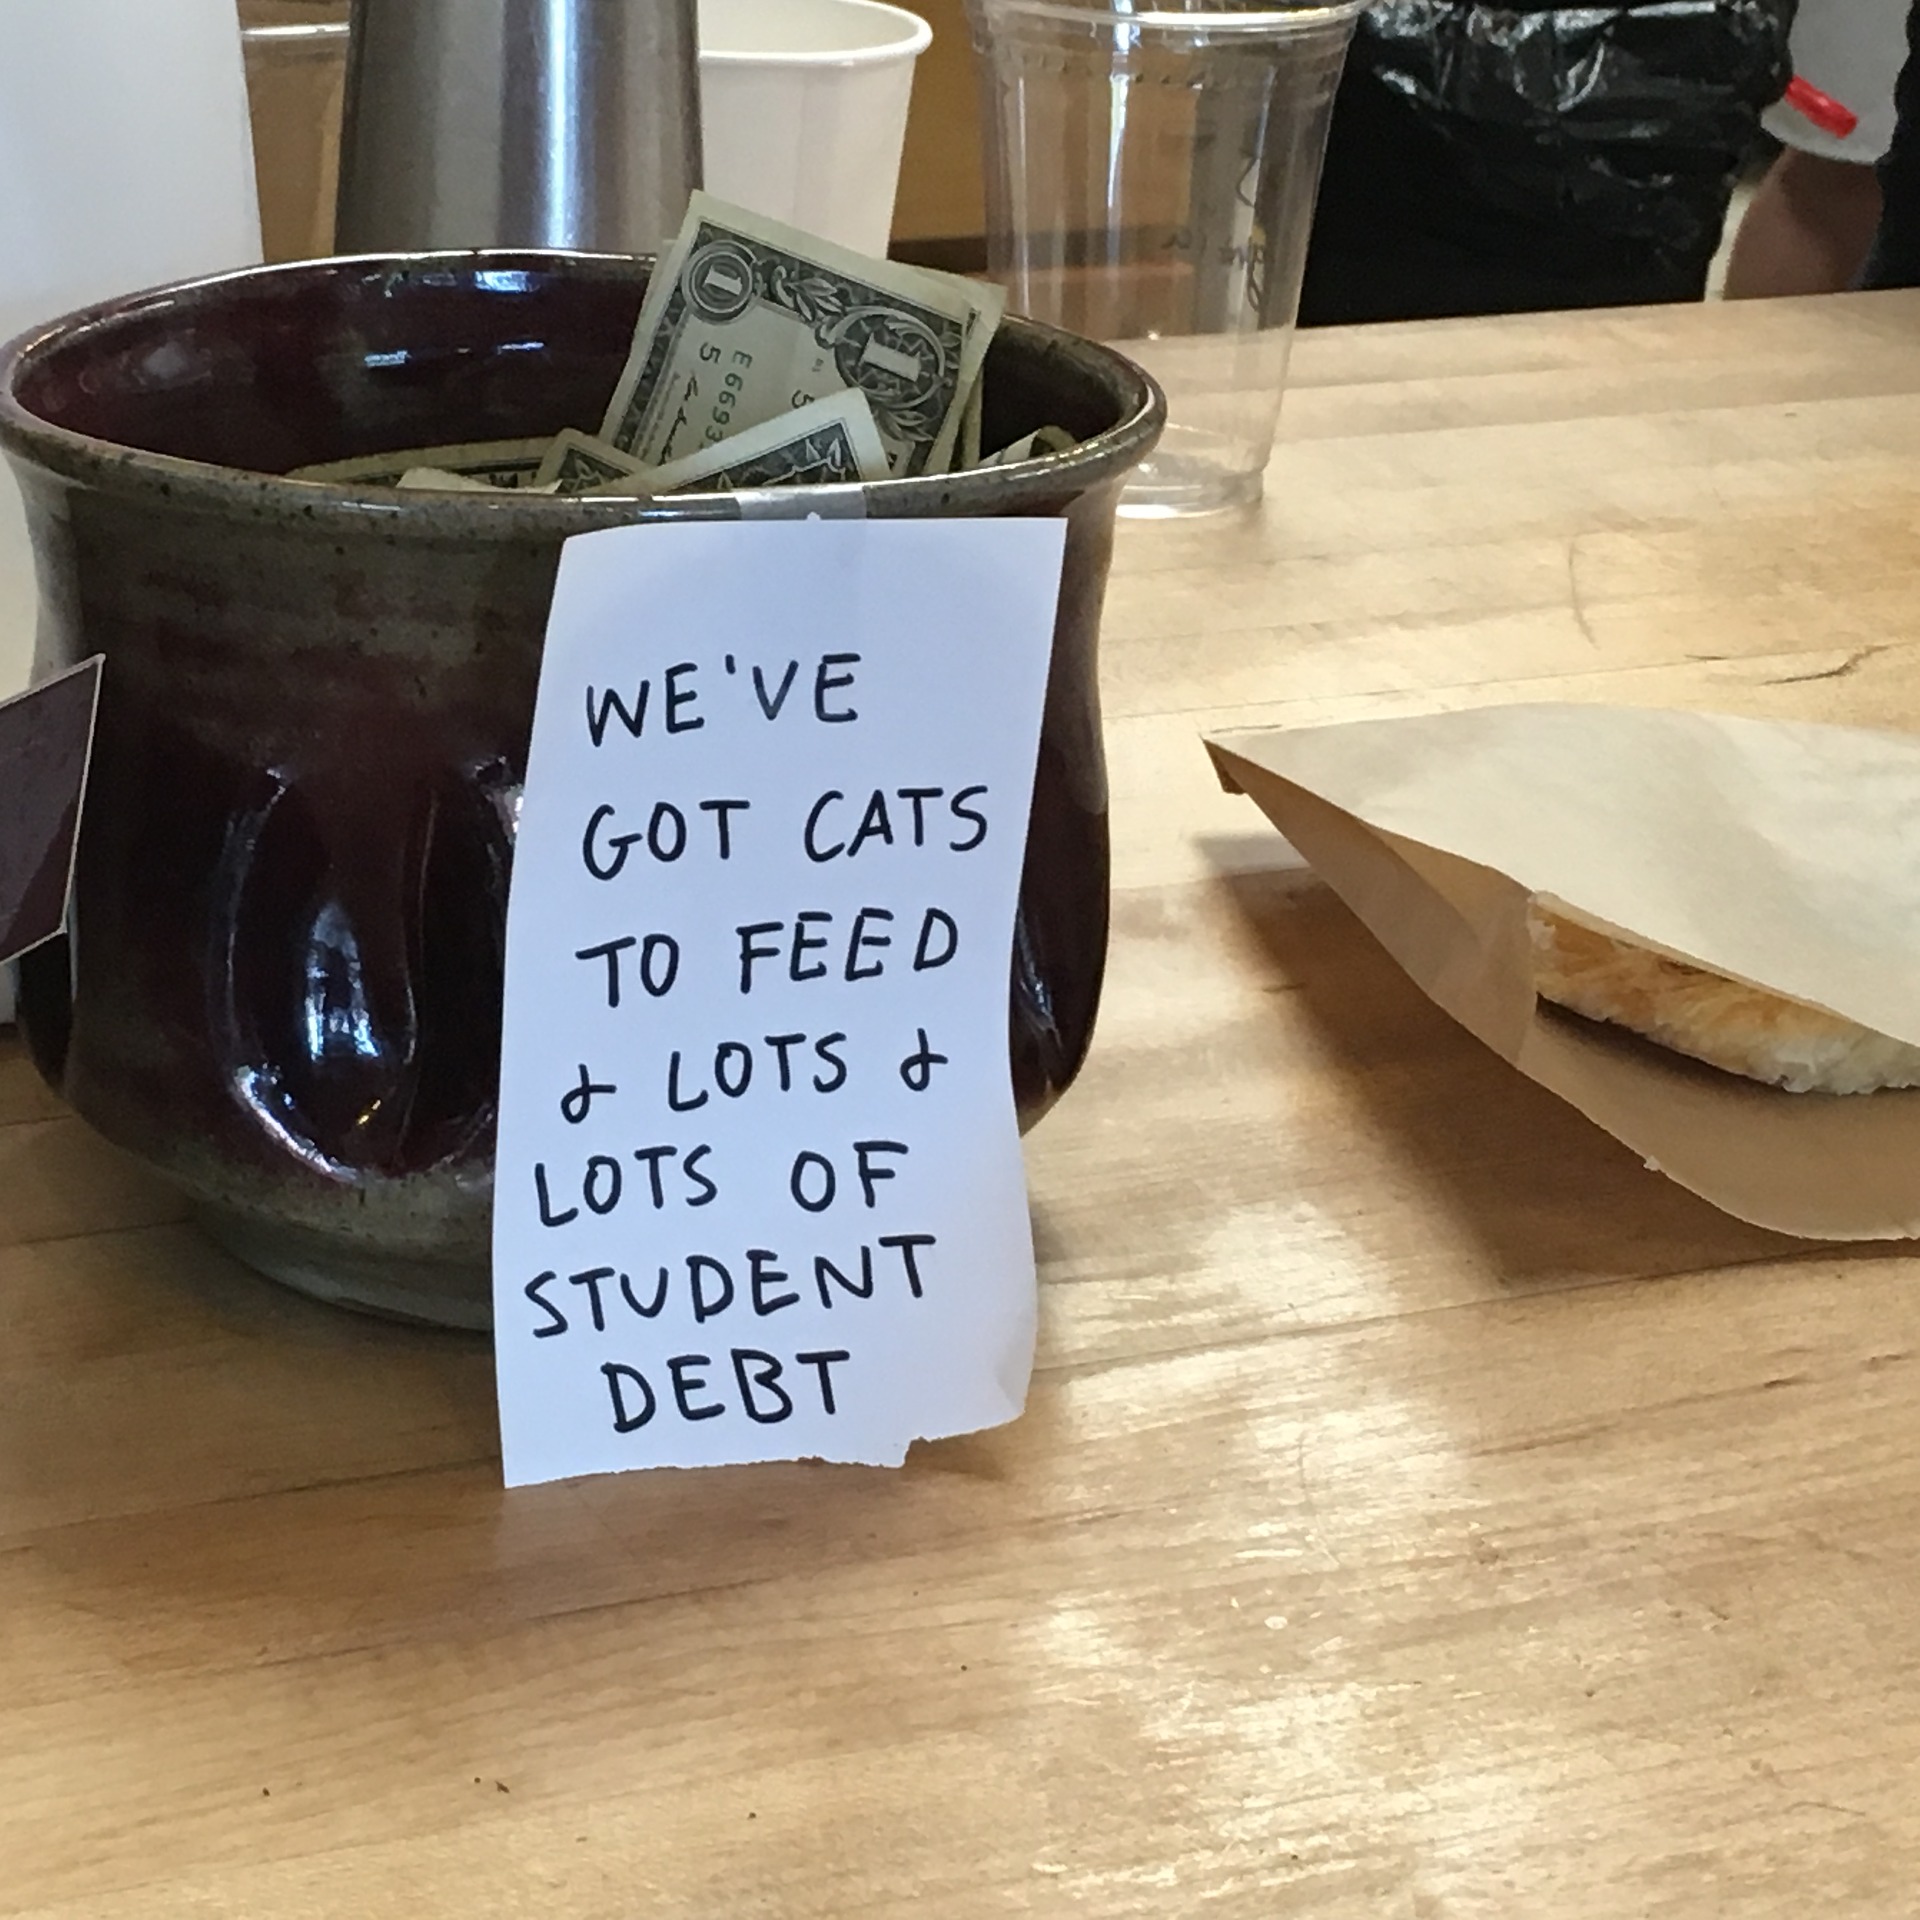 A jar holding dollar bills with a sign on it that reads "We've got cats to feed and lots and lots of student debt"